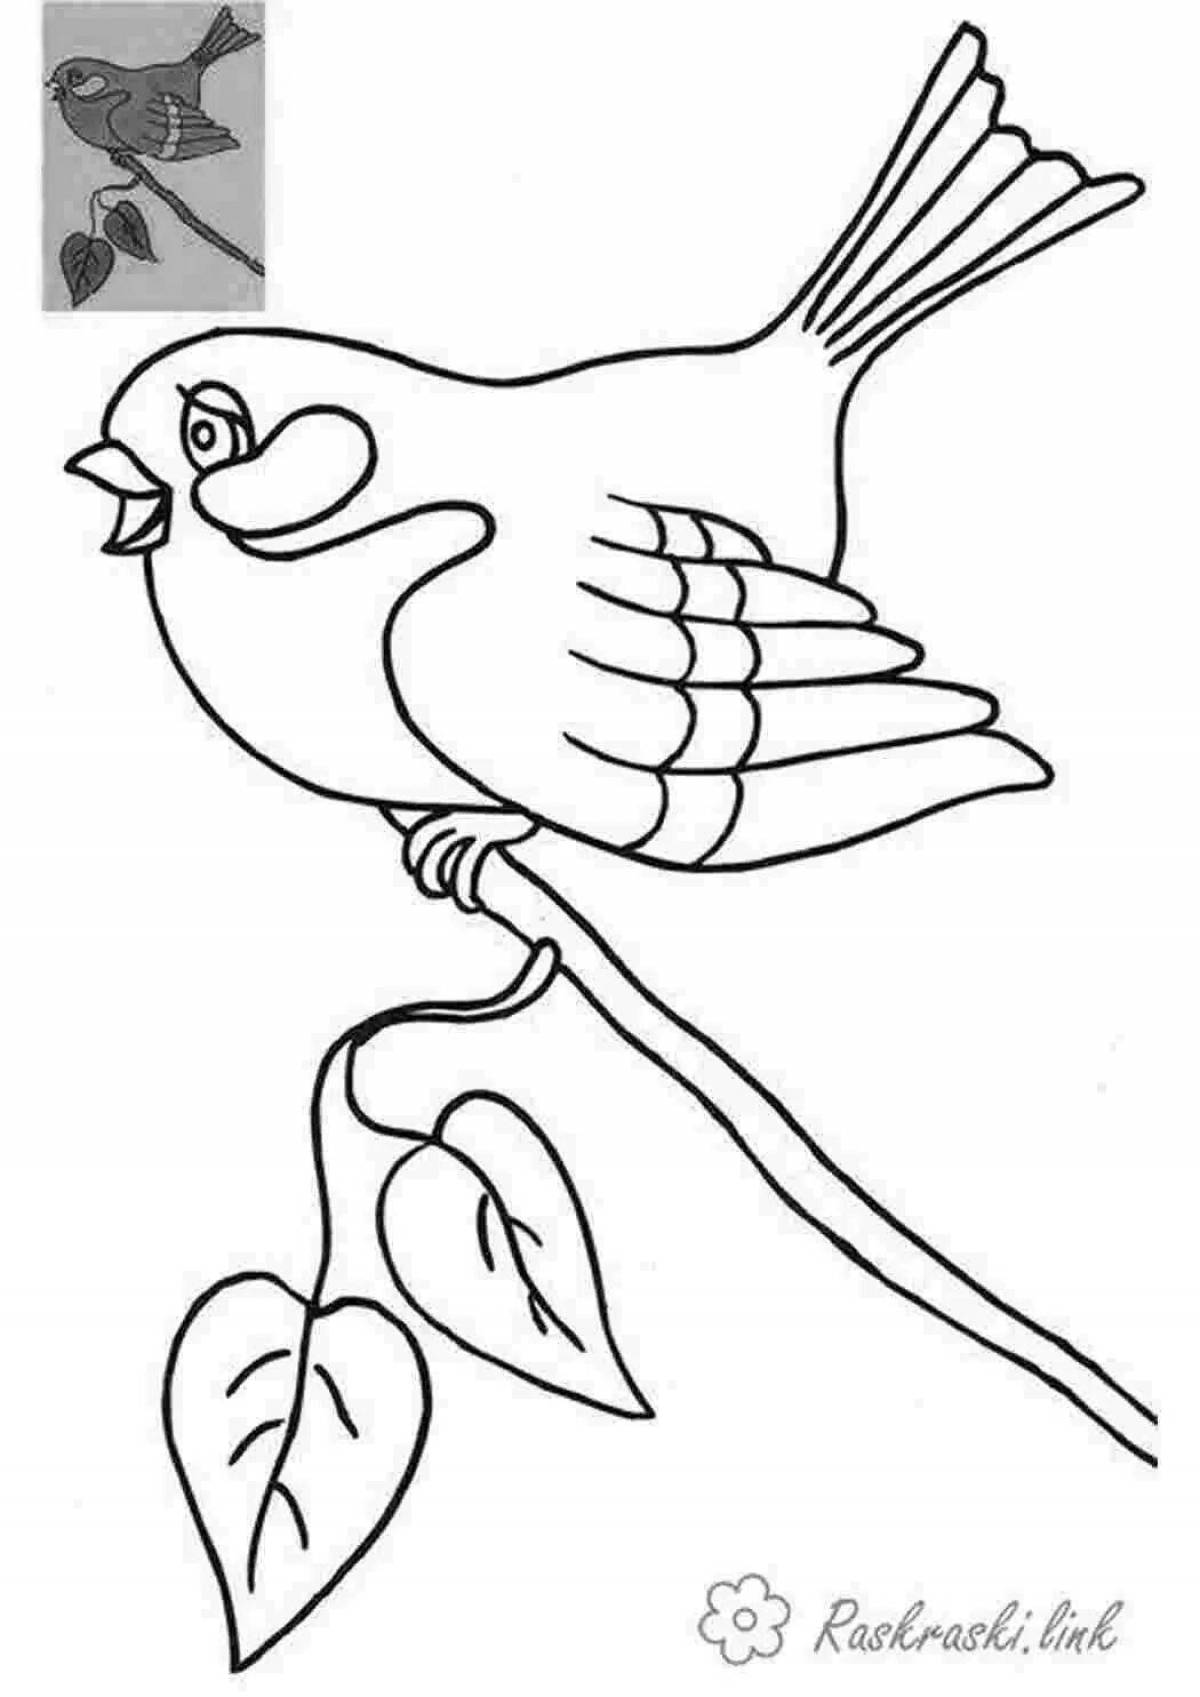 Fun bird coloring book for 5-6 year olds